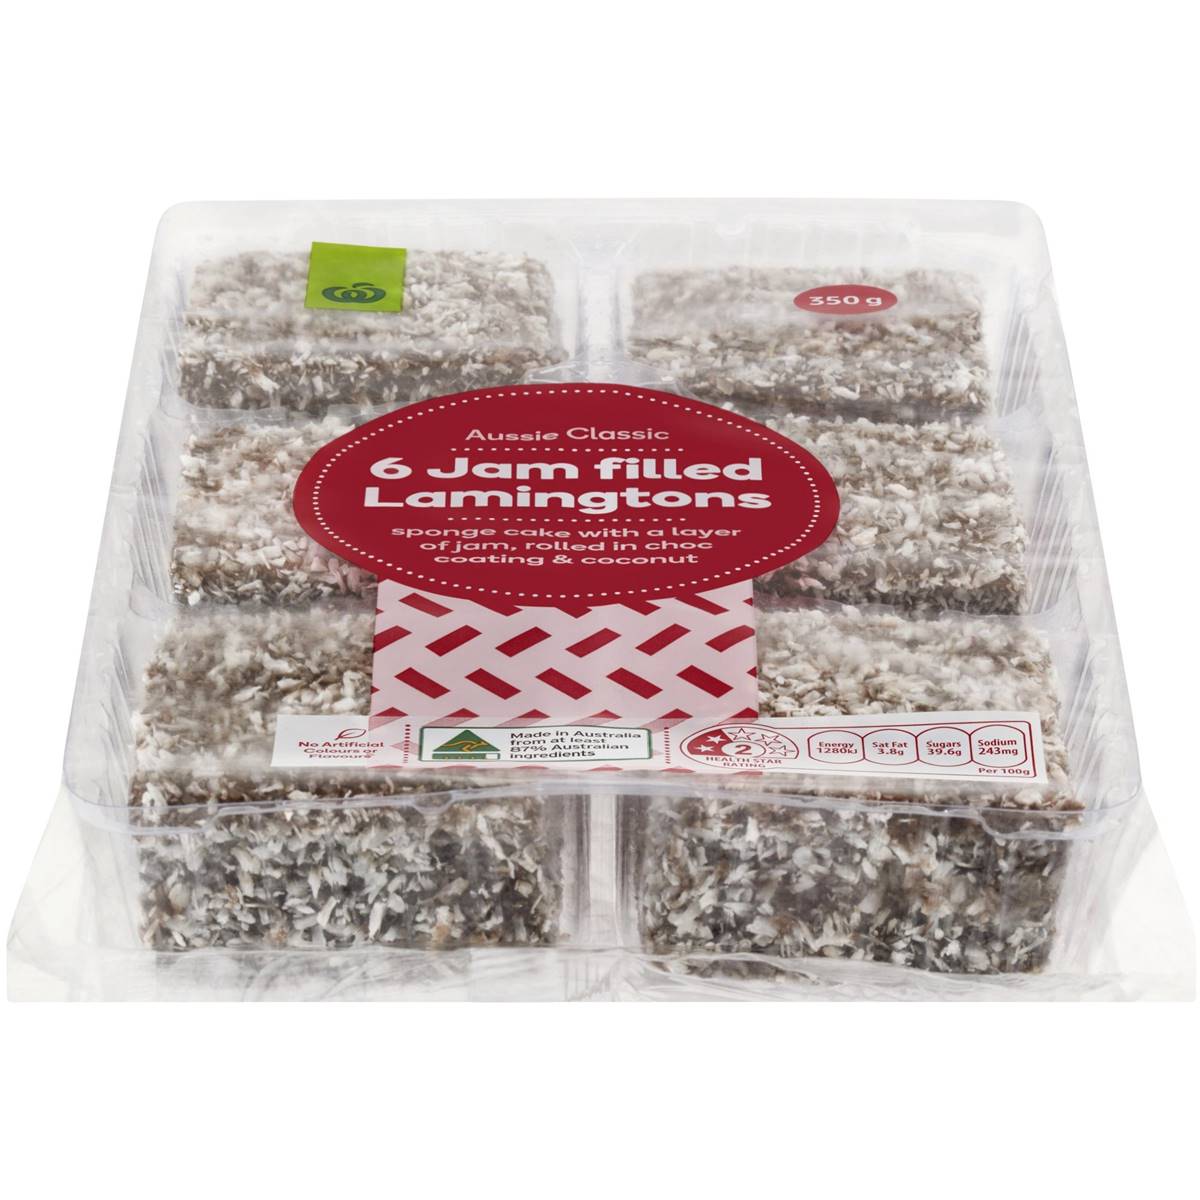 Calories in Woolworths Lamingtons Jam Filled